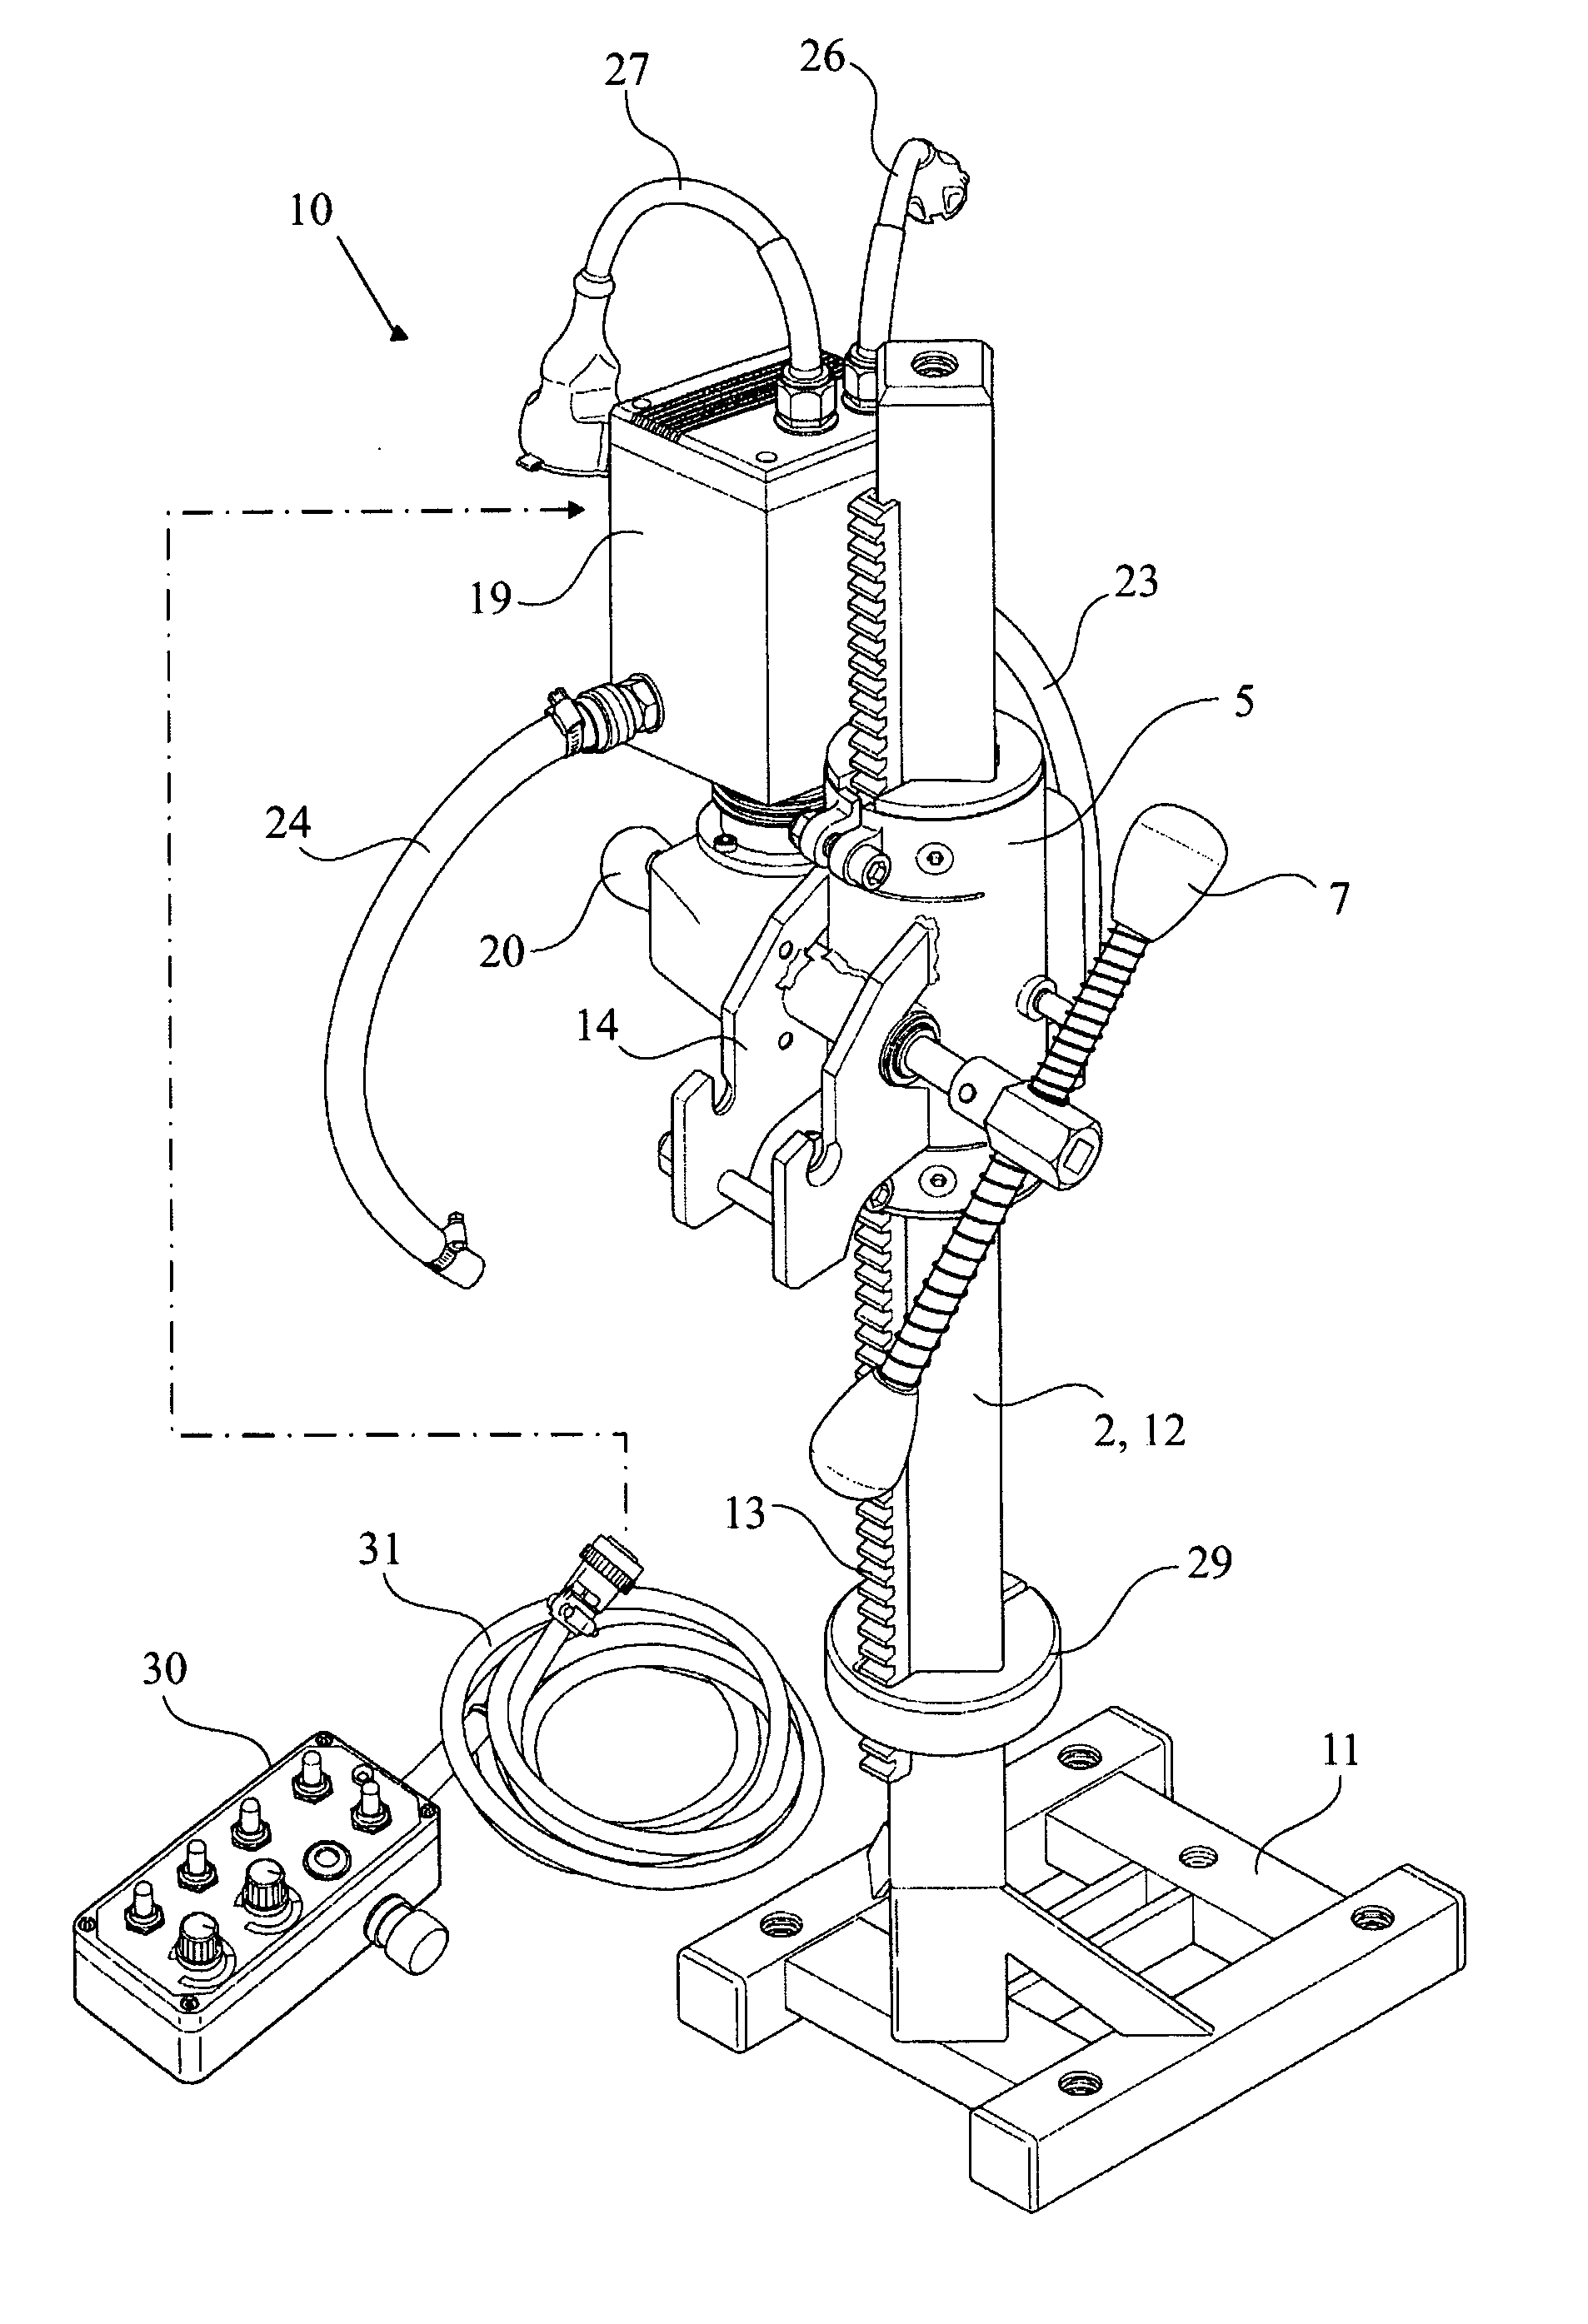 Core Drilling Device With Electrical Feeding That Is Manually Controlled